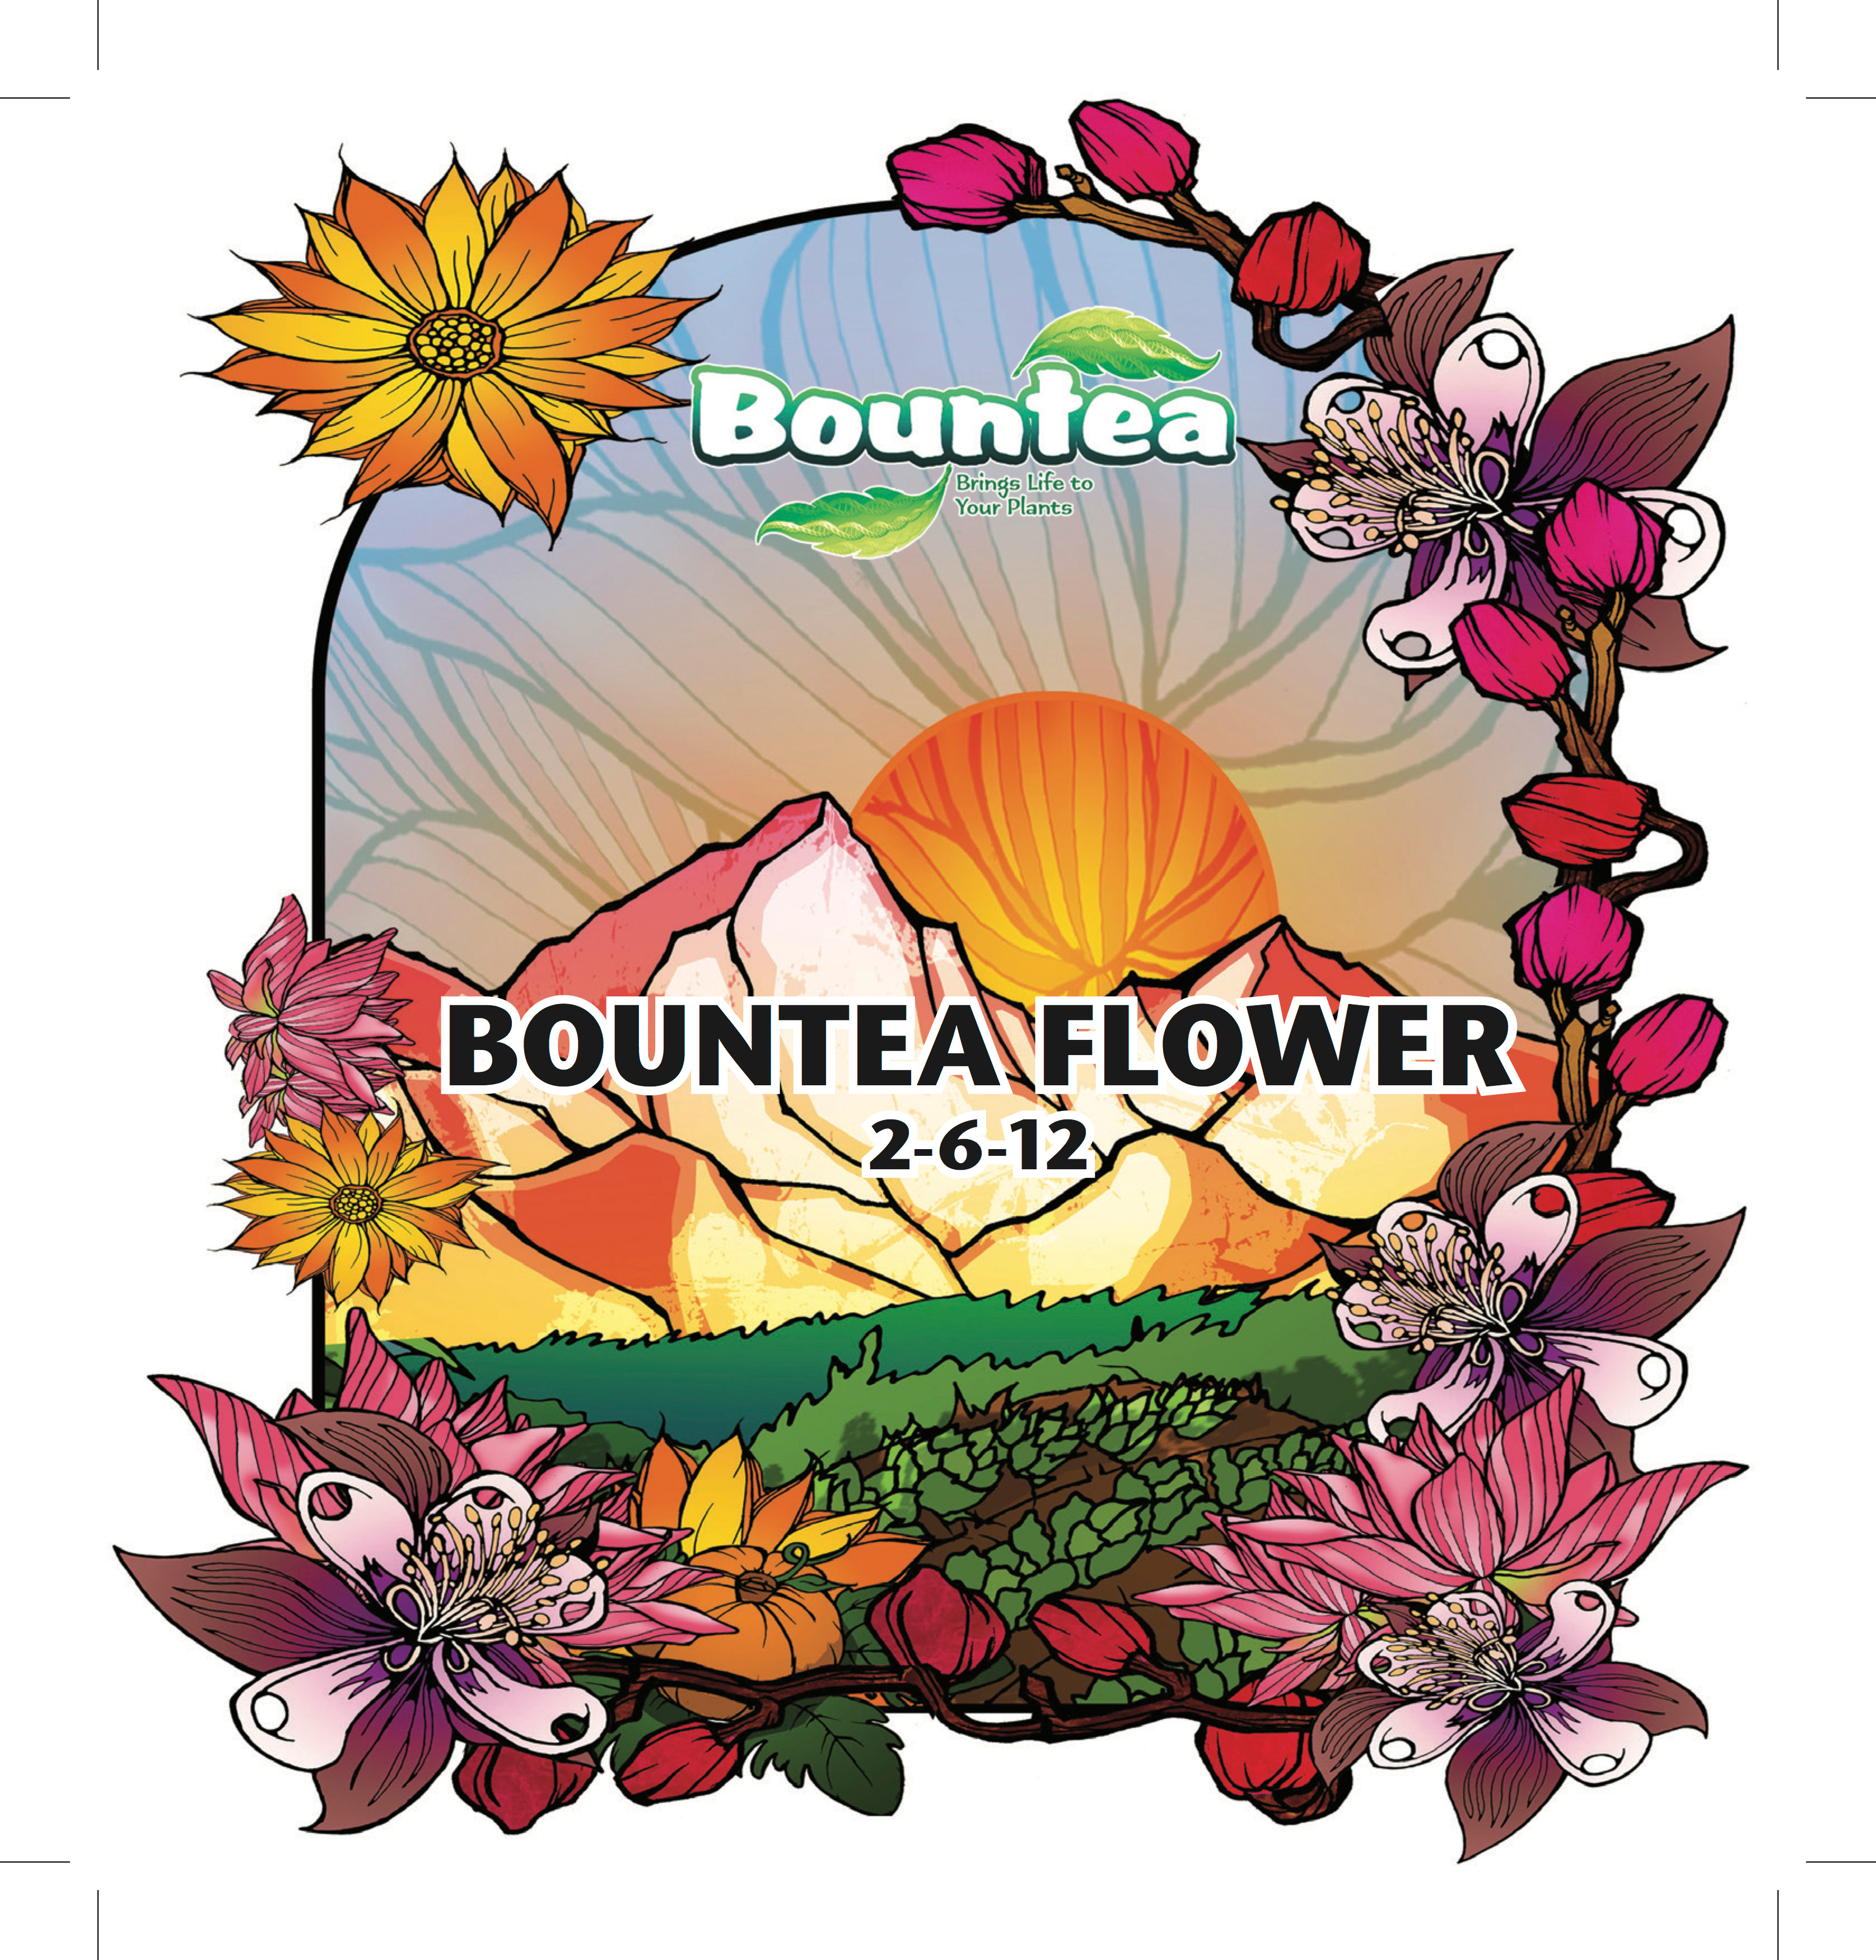 Picture for Bountea Flower, 1 gal